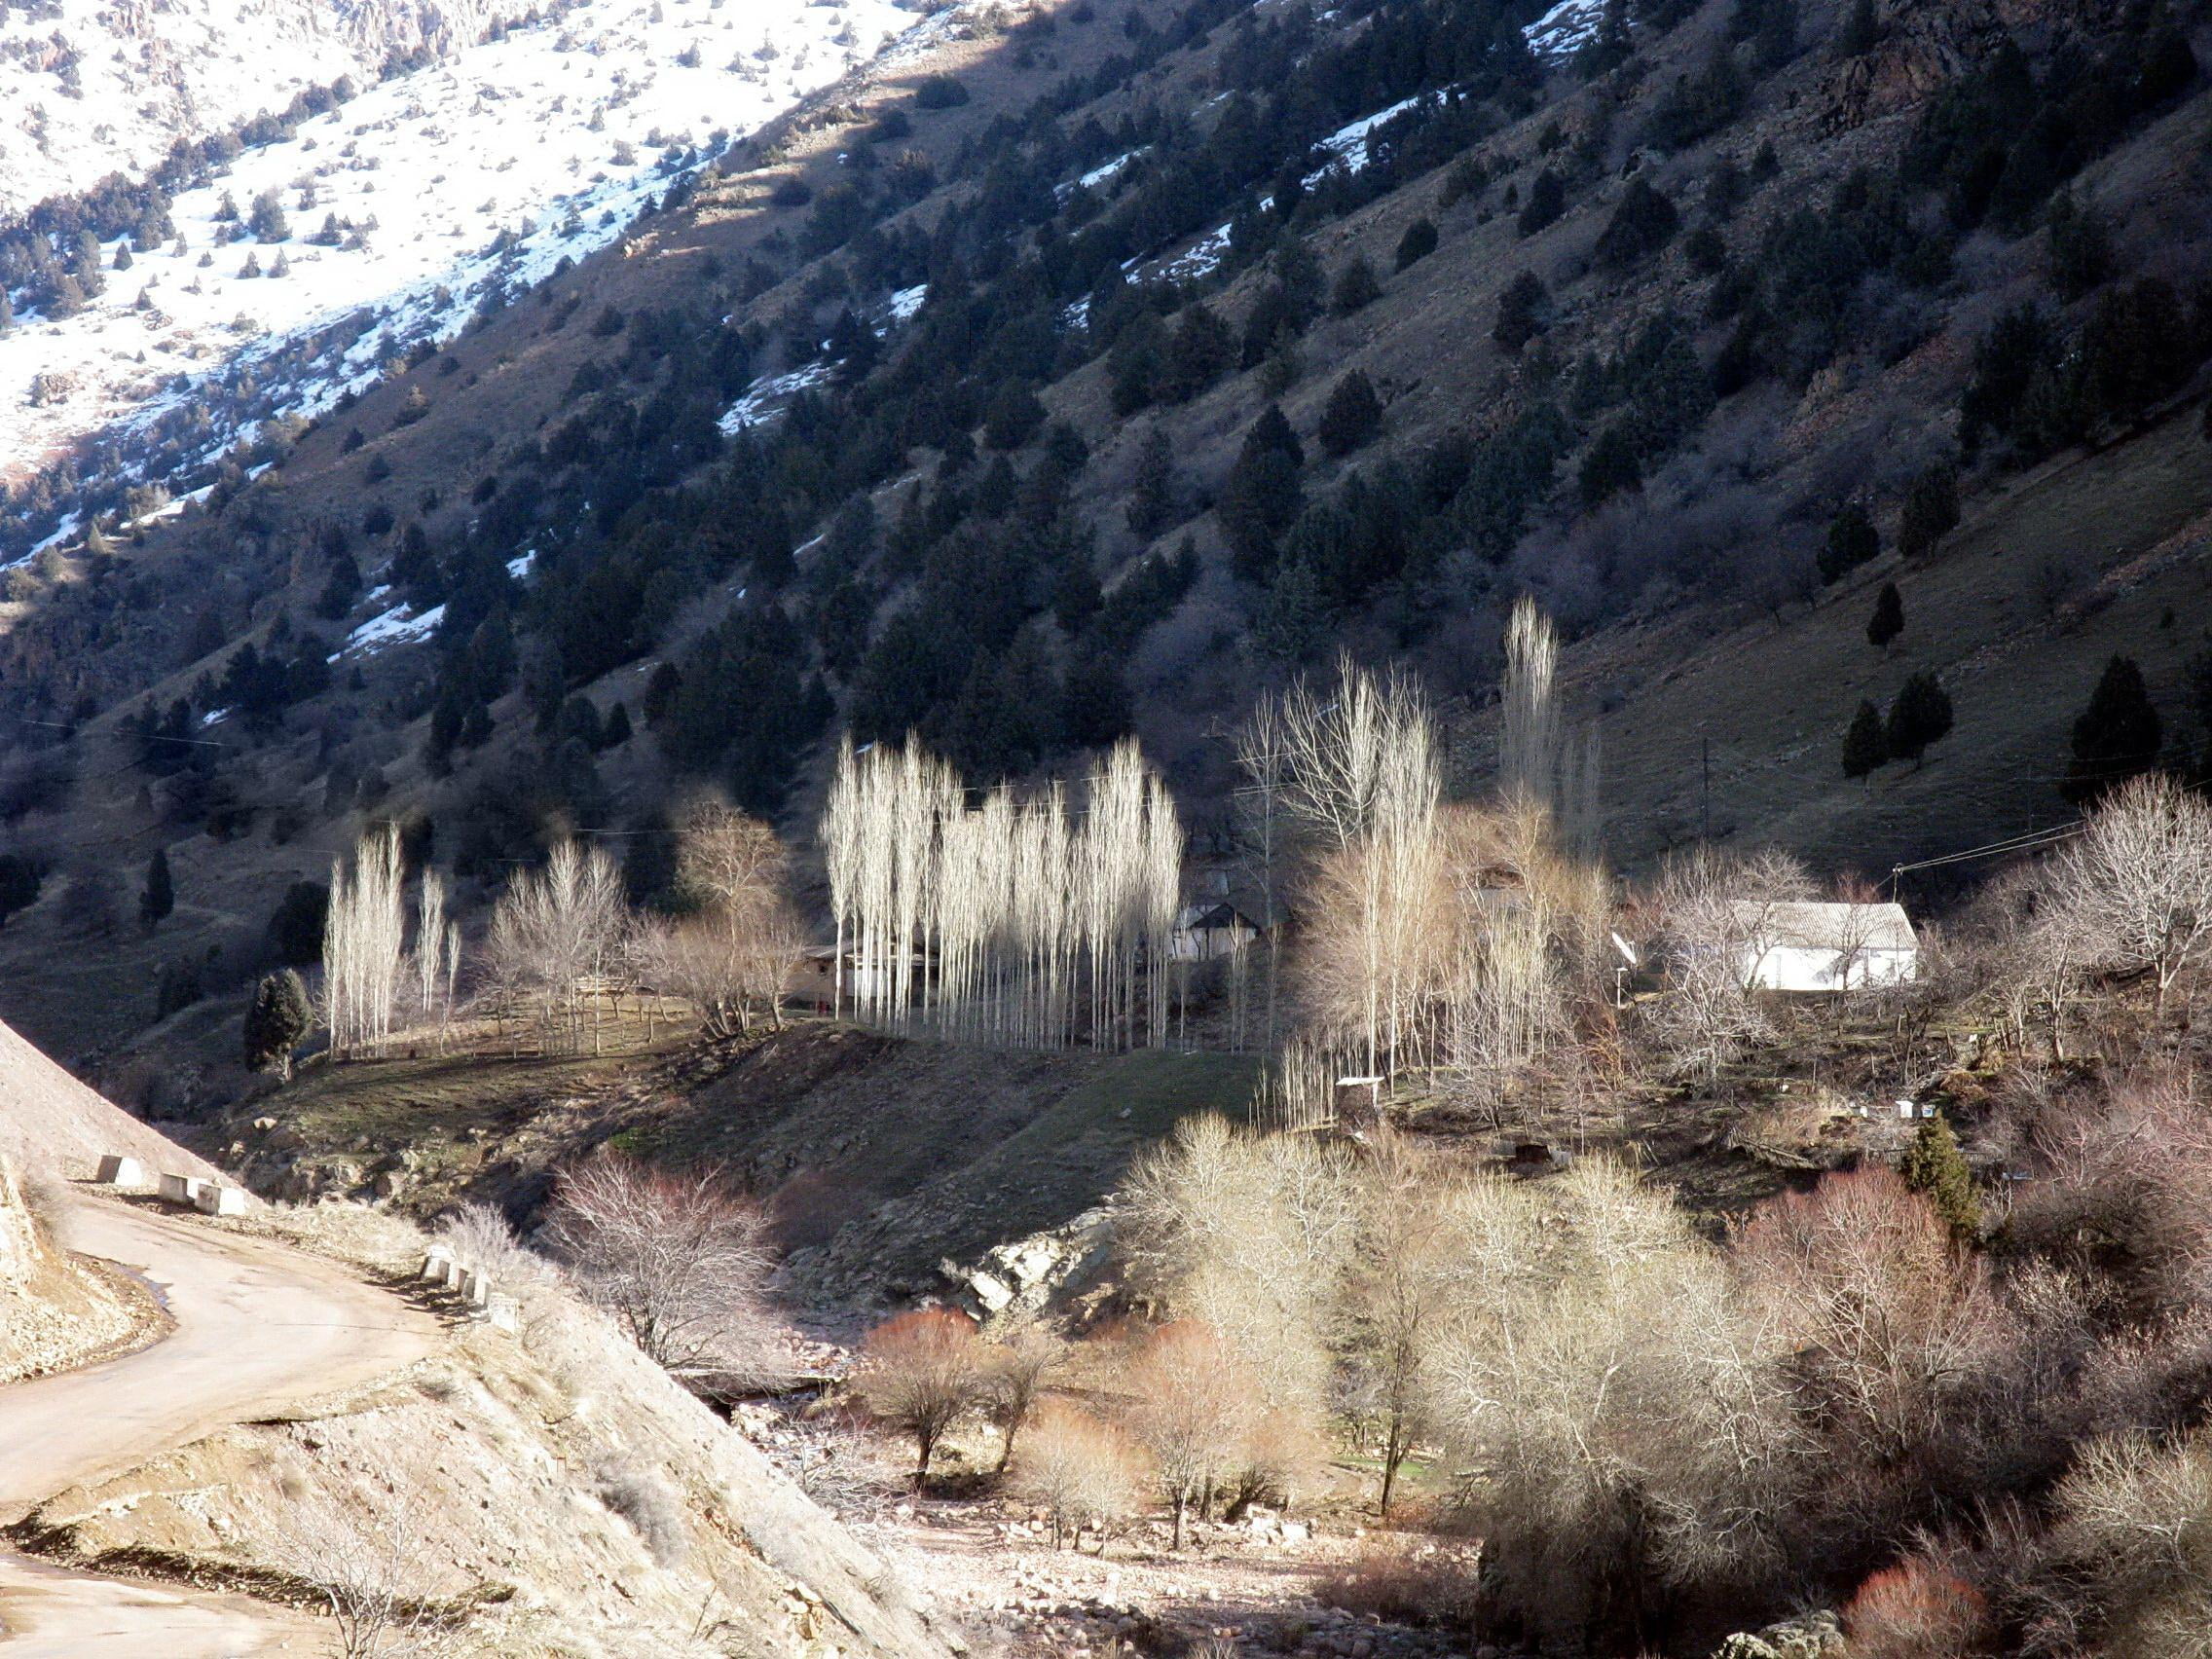 snow, mountains, houses, sun glare, riverbed, plant, tree, beauty in nature